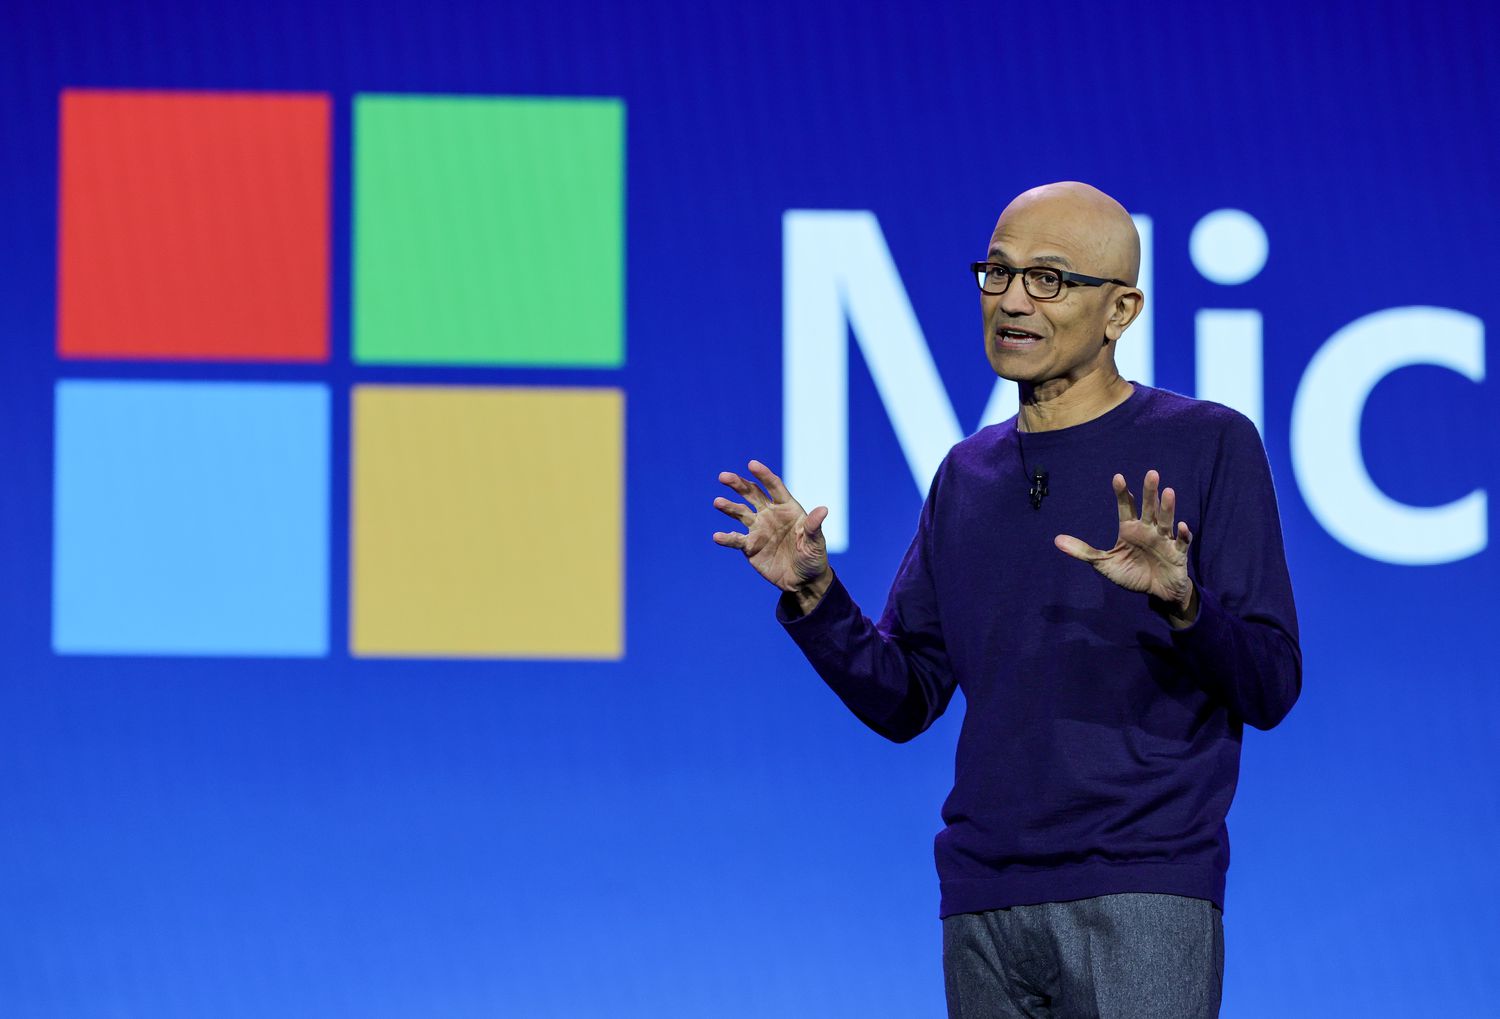 Microsoft Stock Jumps On Earnings Beat Driven By Cloud Segment [Video]